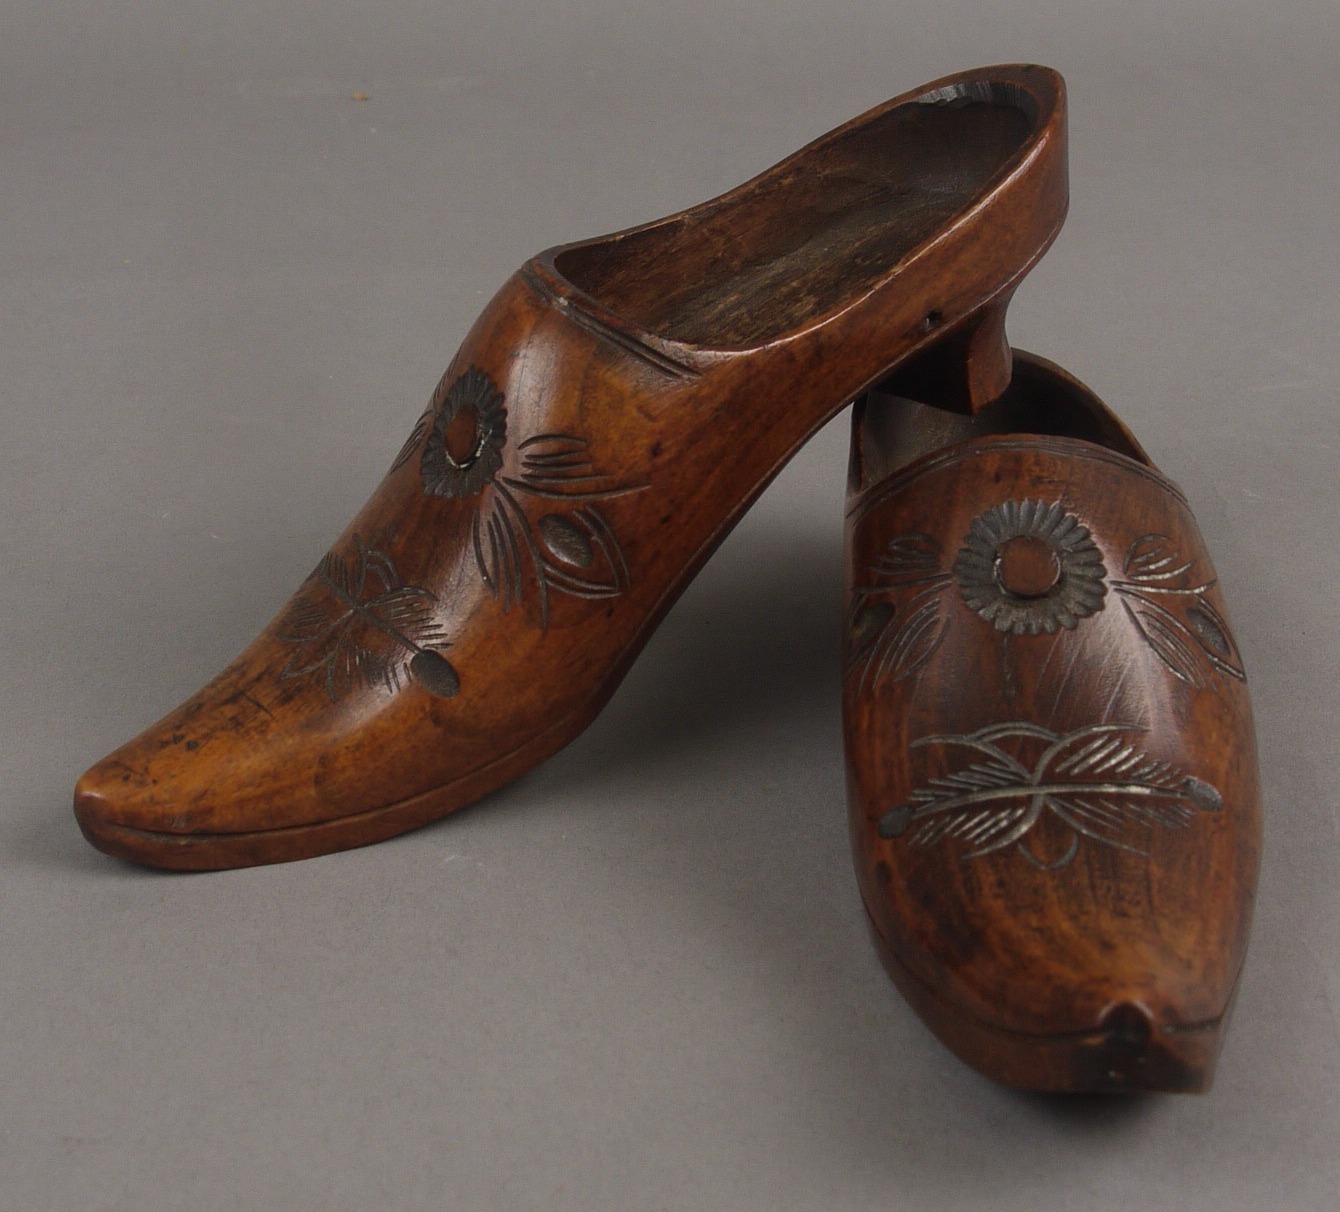 A PAIR OF 19TH CENTURY FRUITWOOD CLOGS, the elongated fronts carved with flowers and leaves, 14cm